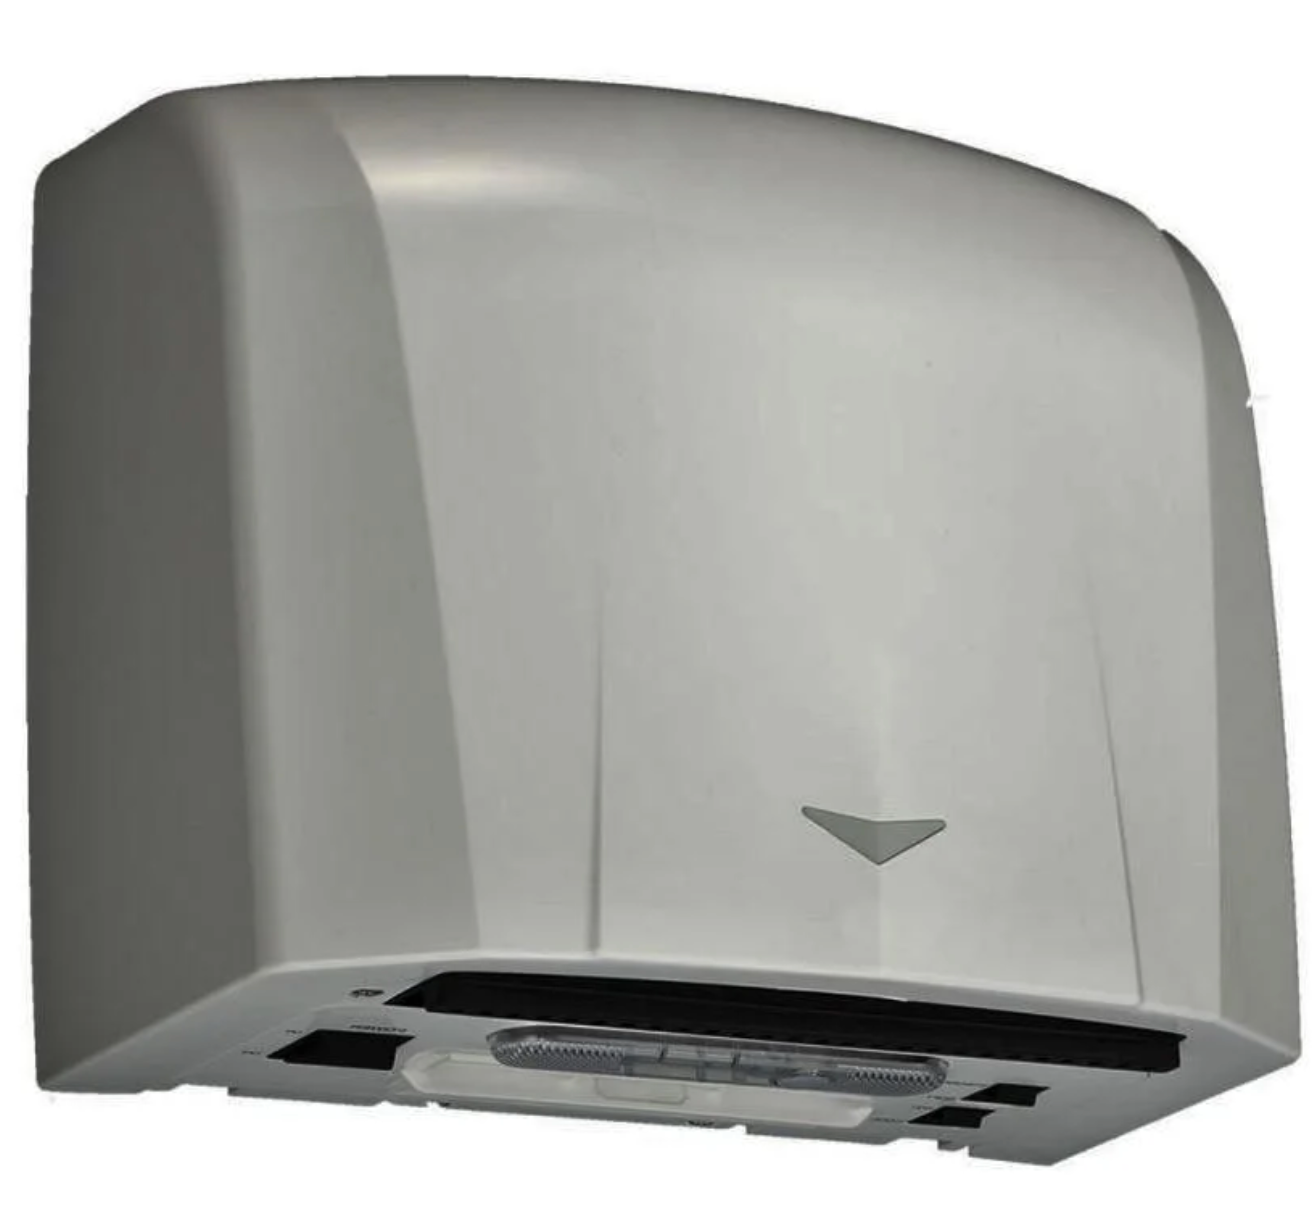 Gladiator Blade Hand Dryer Brushed Stainless